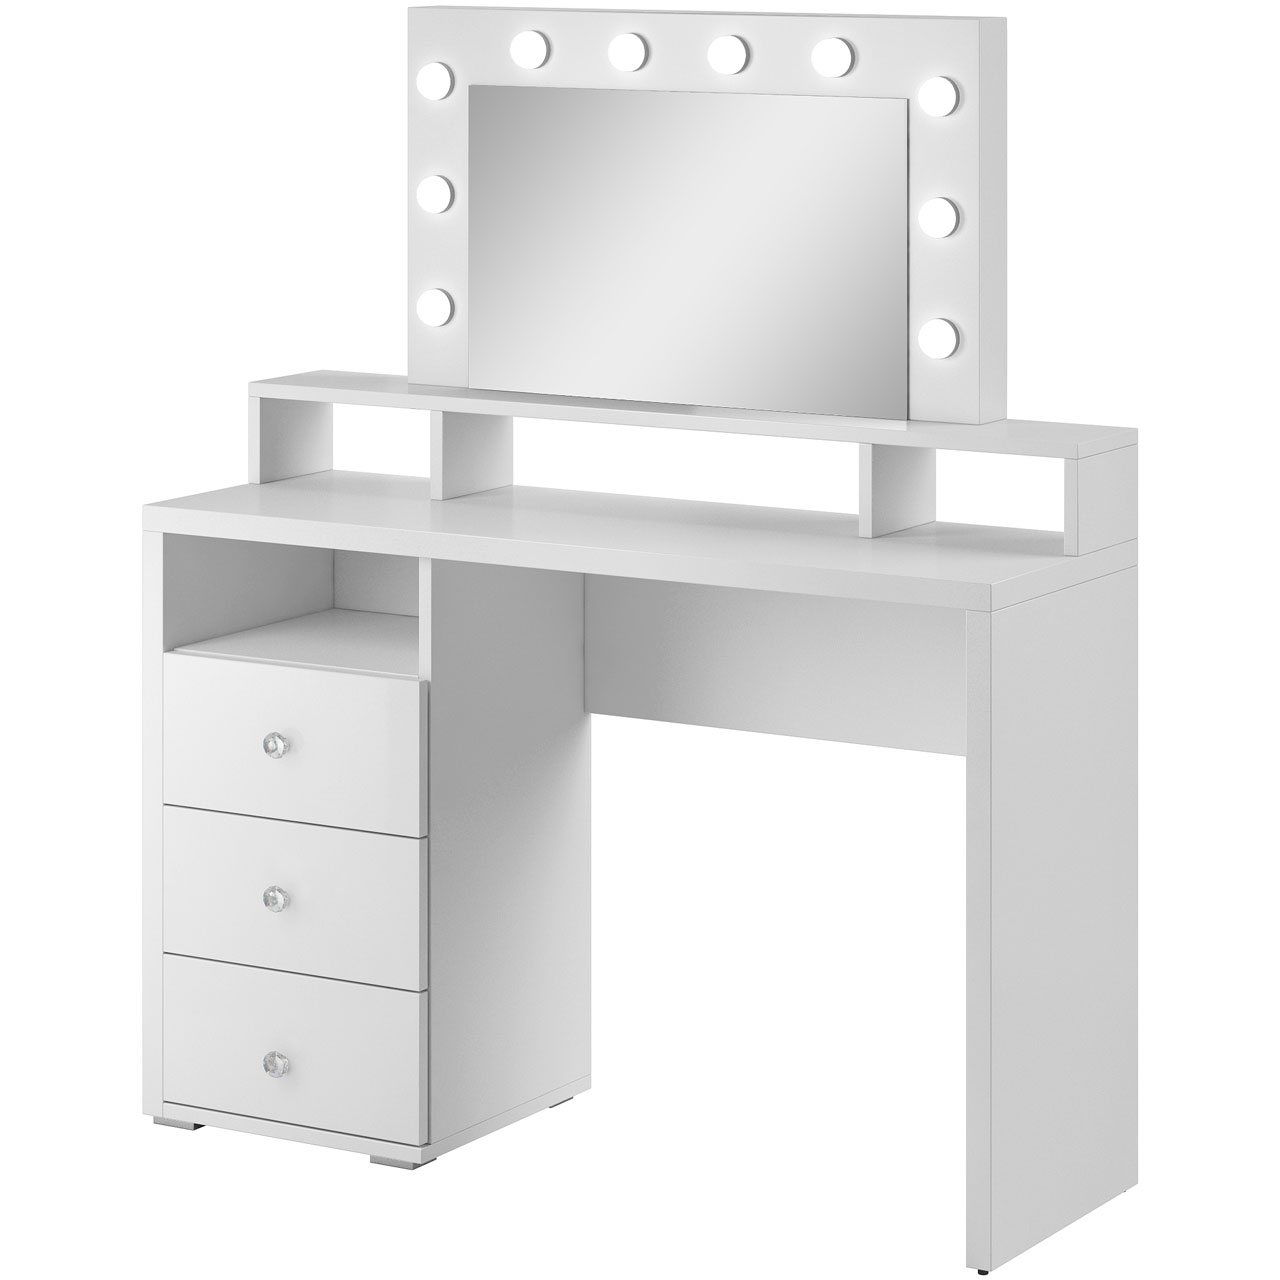 Dressing table with mirror and lighting DIVA white